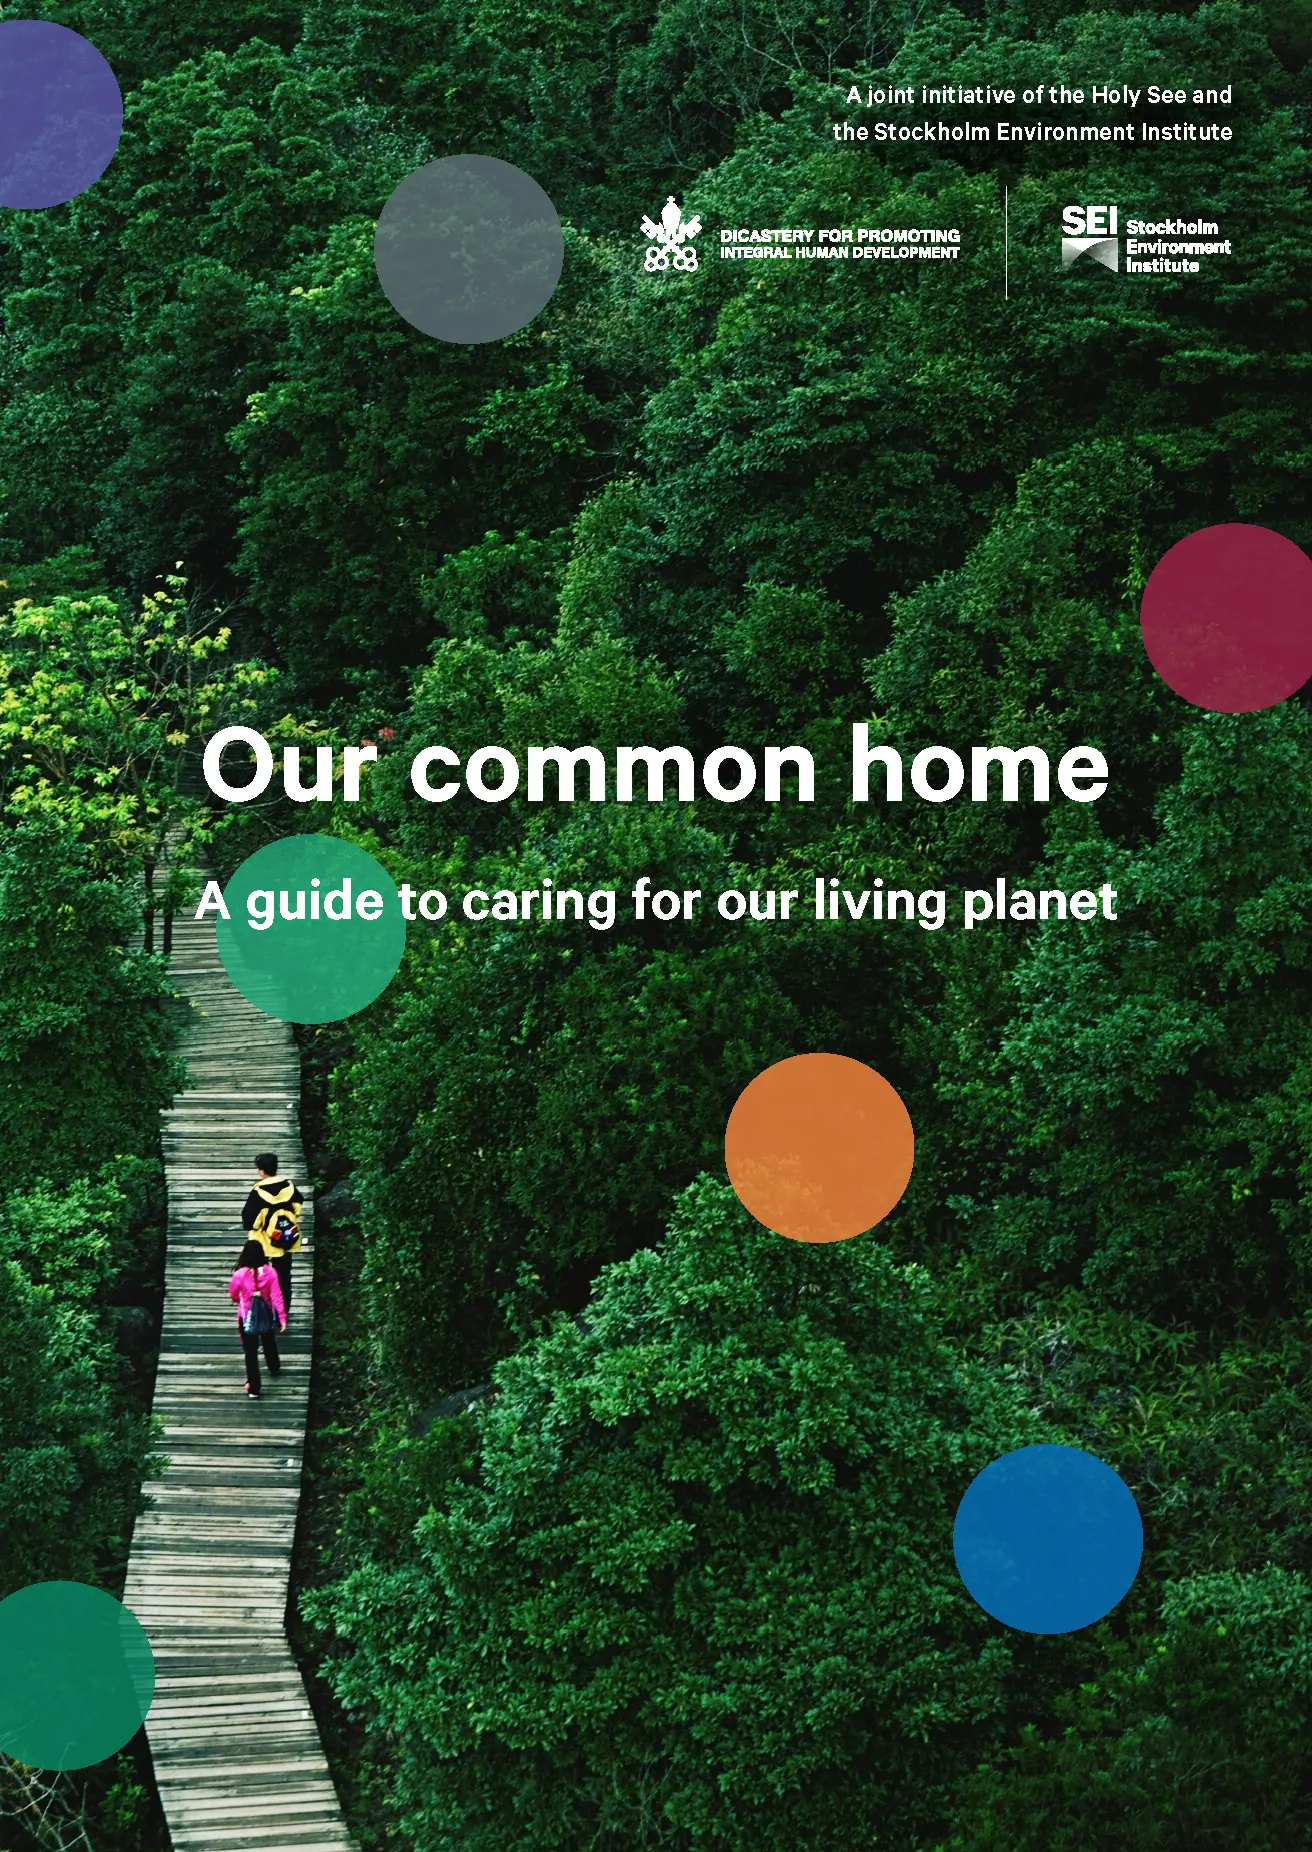 <i>Our Common Home: A Guide to Caring for Our Living Planet</i>, a new publication by the Stockholm Environment Institute and the Vatican Dicastery for Promoting Integral Human Development